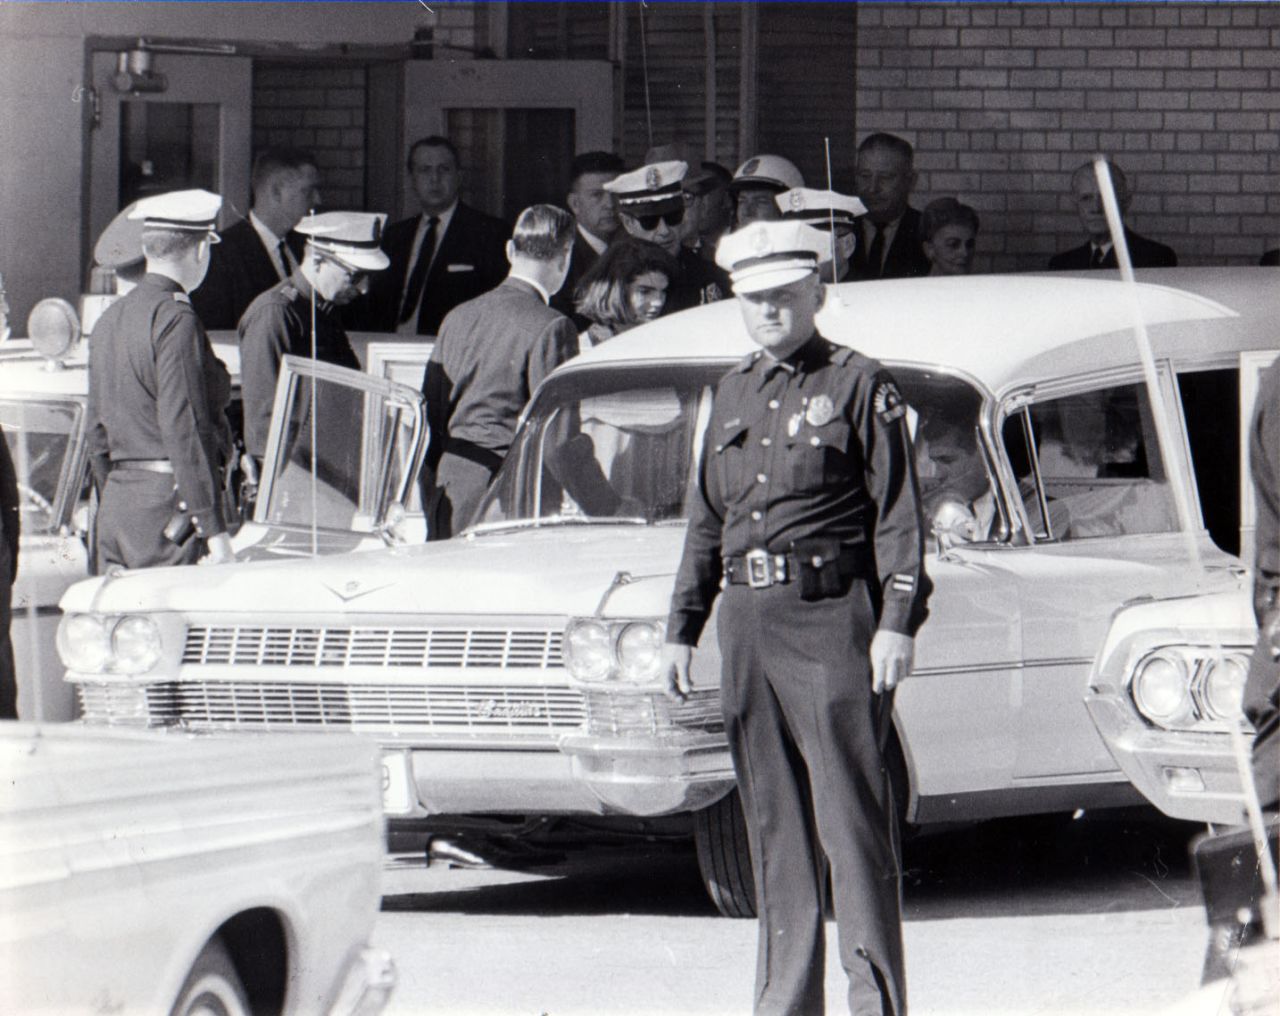 After 2 p.m., Jacqueline Kennedy leaves Parkland Hospital with her slain husband's body. She would ride in the back with the bronze casket. "I had a feeling that if somebody had literally fired a pistol in front of her face that she would just have blinked," said Dallas Police Officer James Jennings, who helped put the casket in the hearse. 